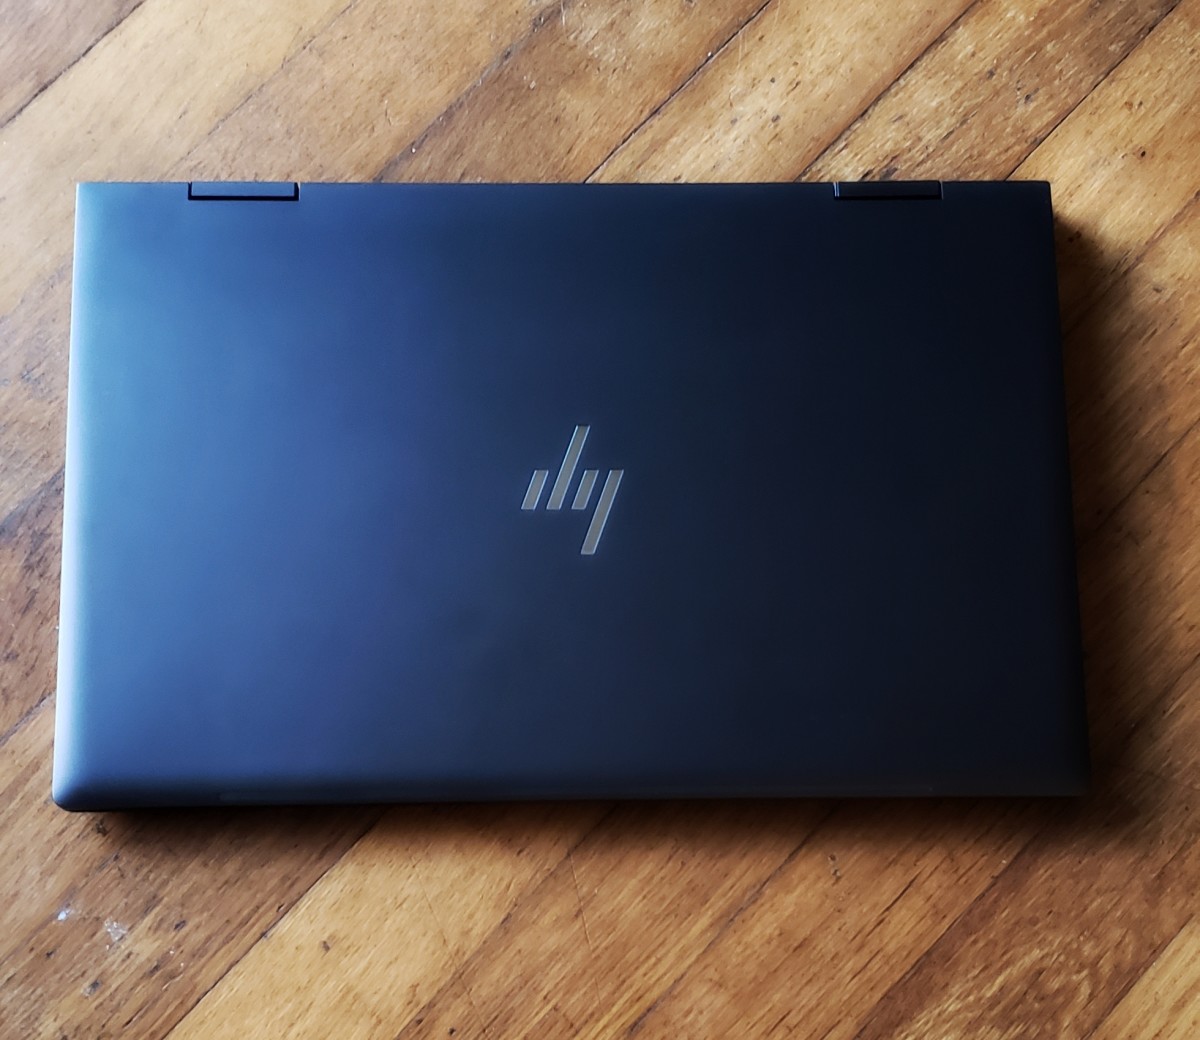 An Honest Review of The HP Envy x360 2-in-1 Laptop